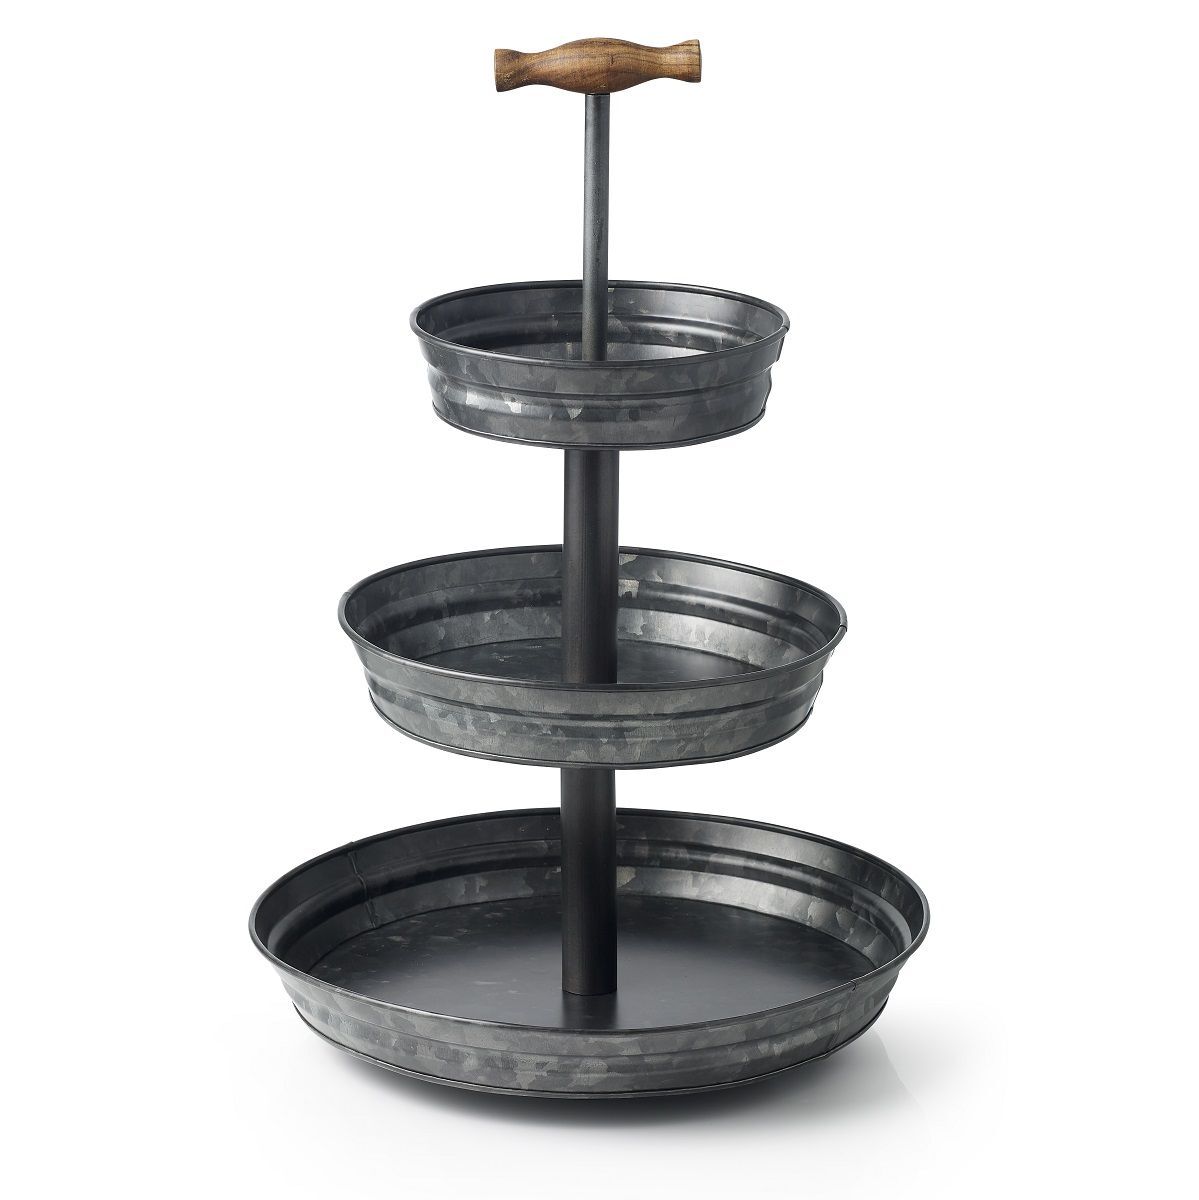 Chef Inox Black Galvanised Metal 3 Tier Stand with Handle